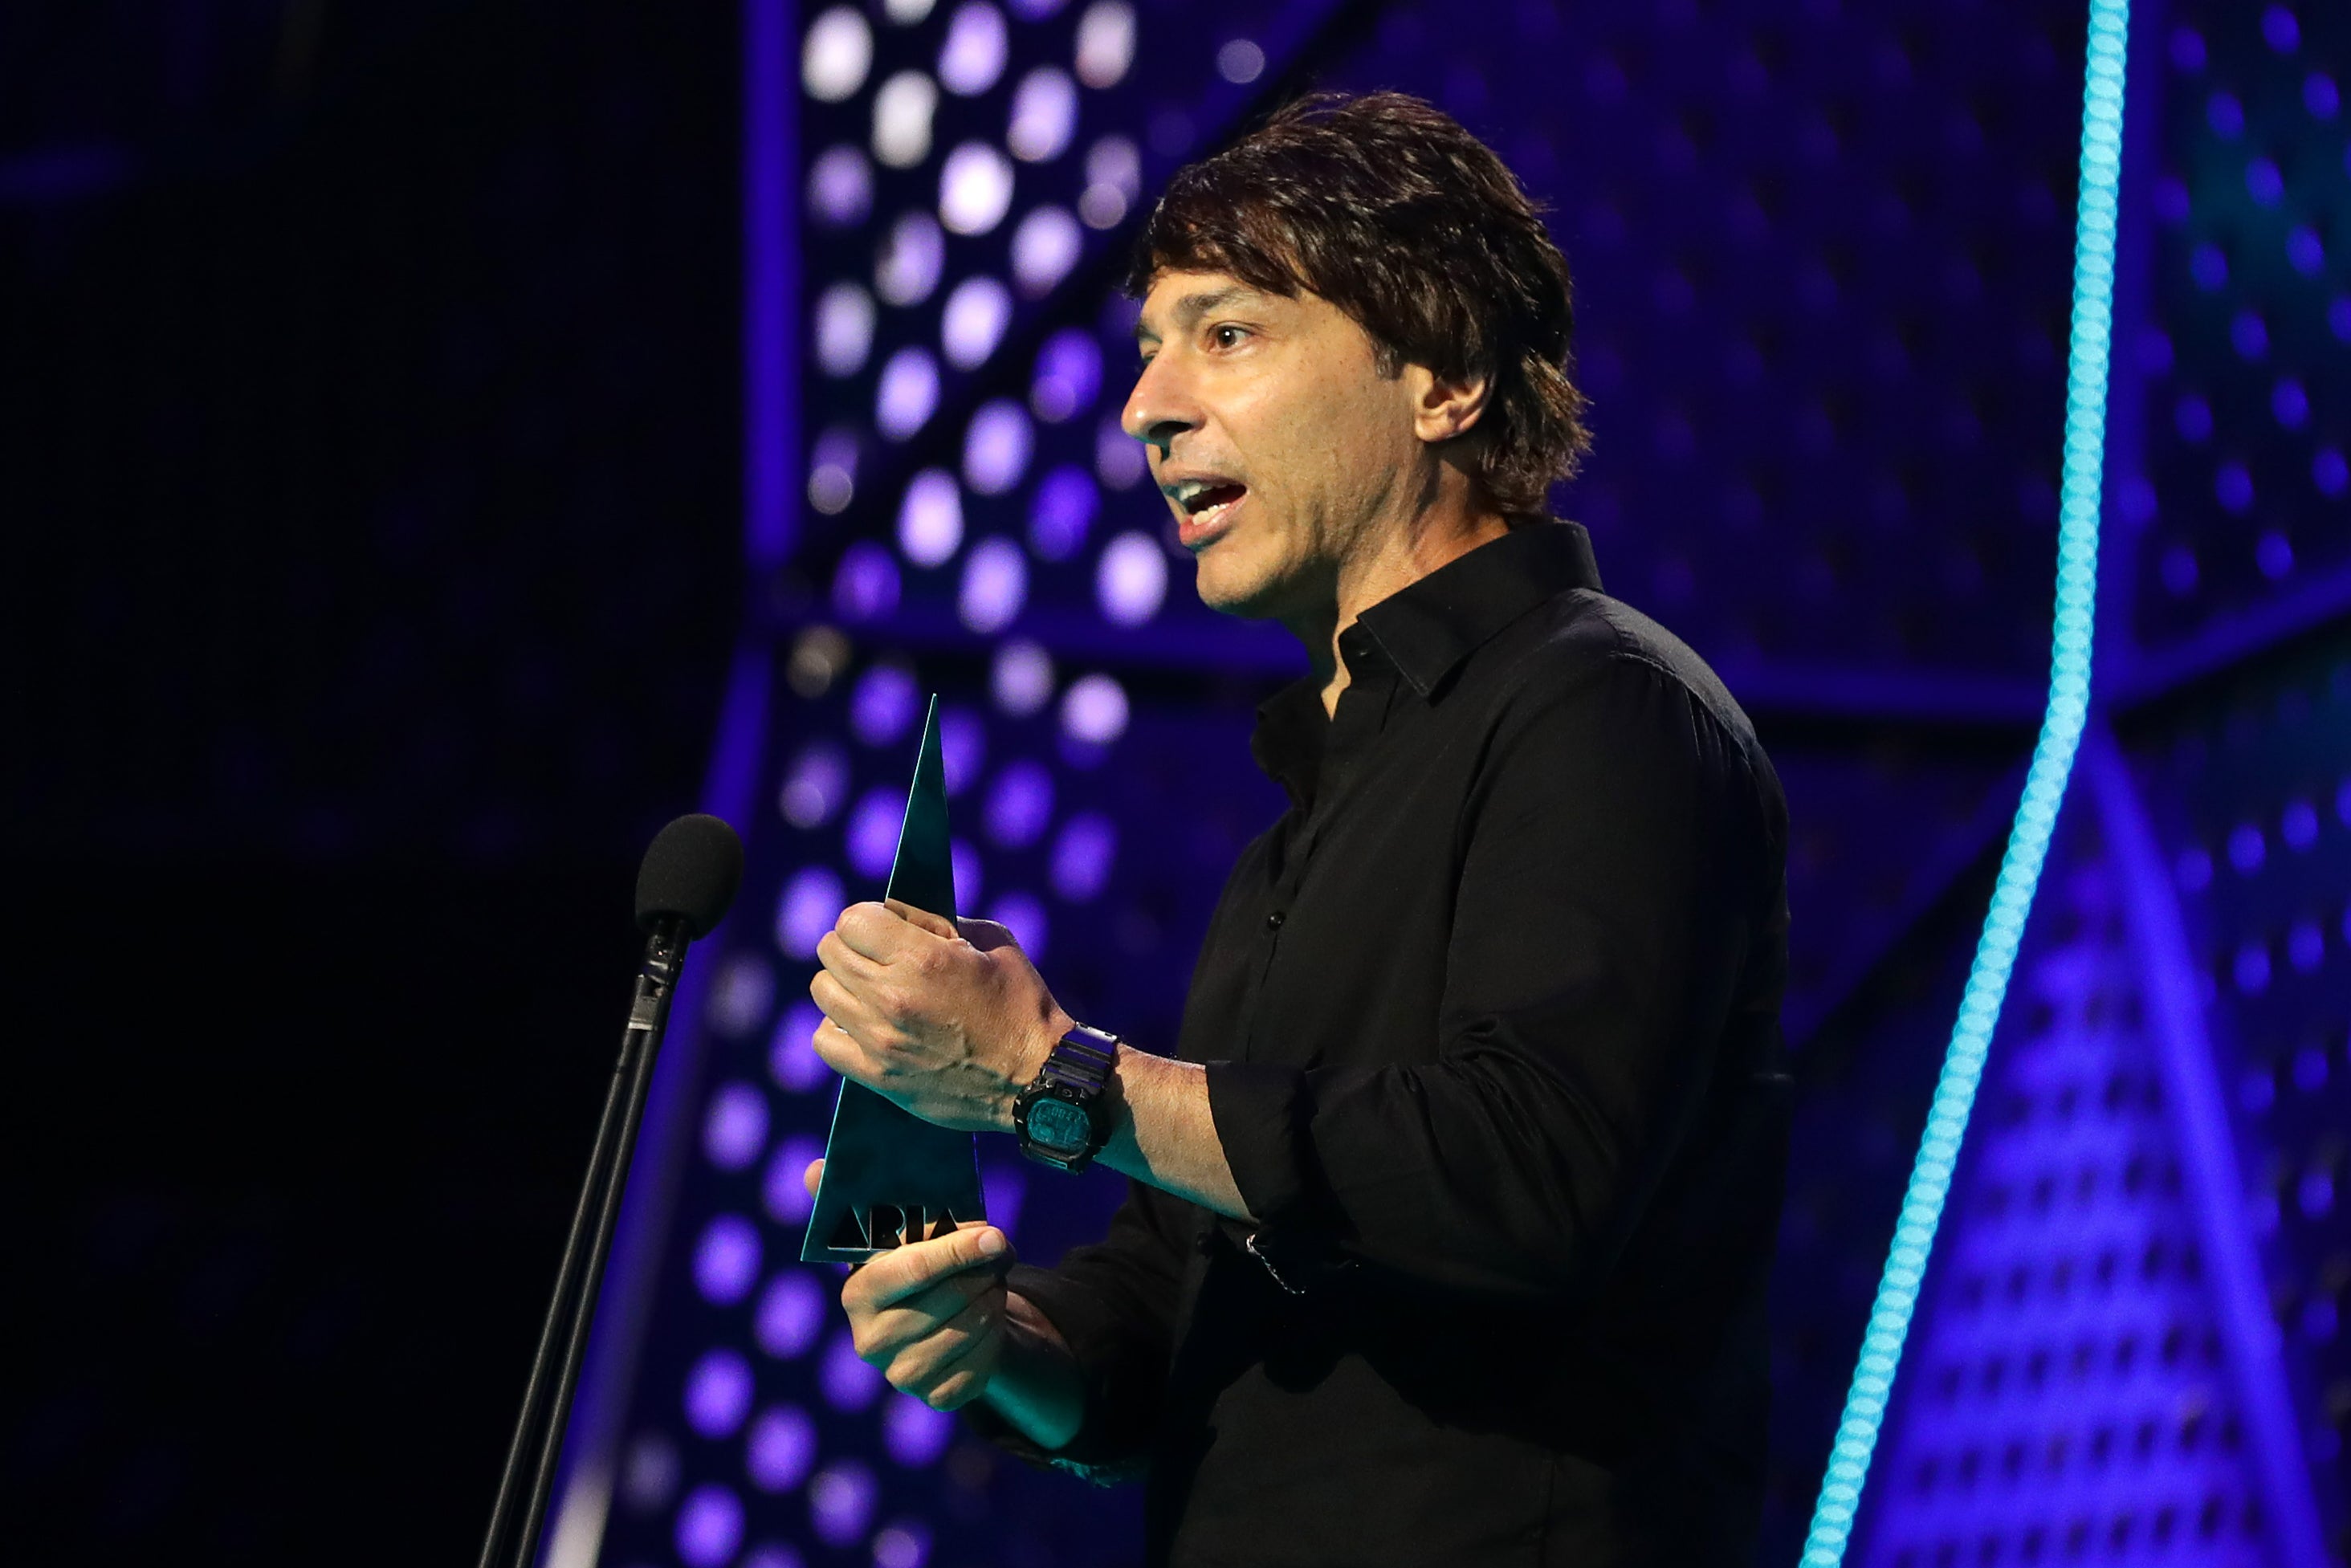 comedian arj barker defends decision to kick ‘breastfeeding’ mother and baby out of show